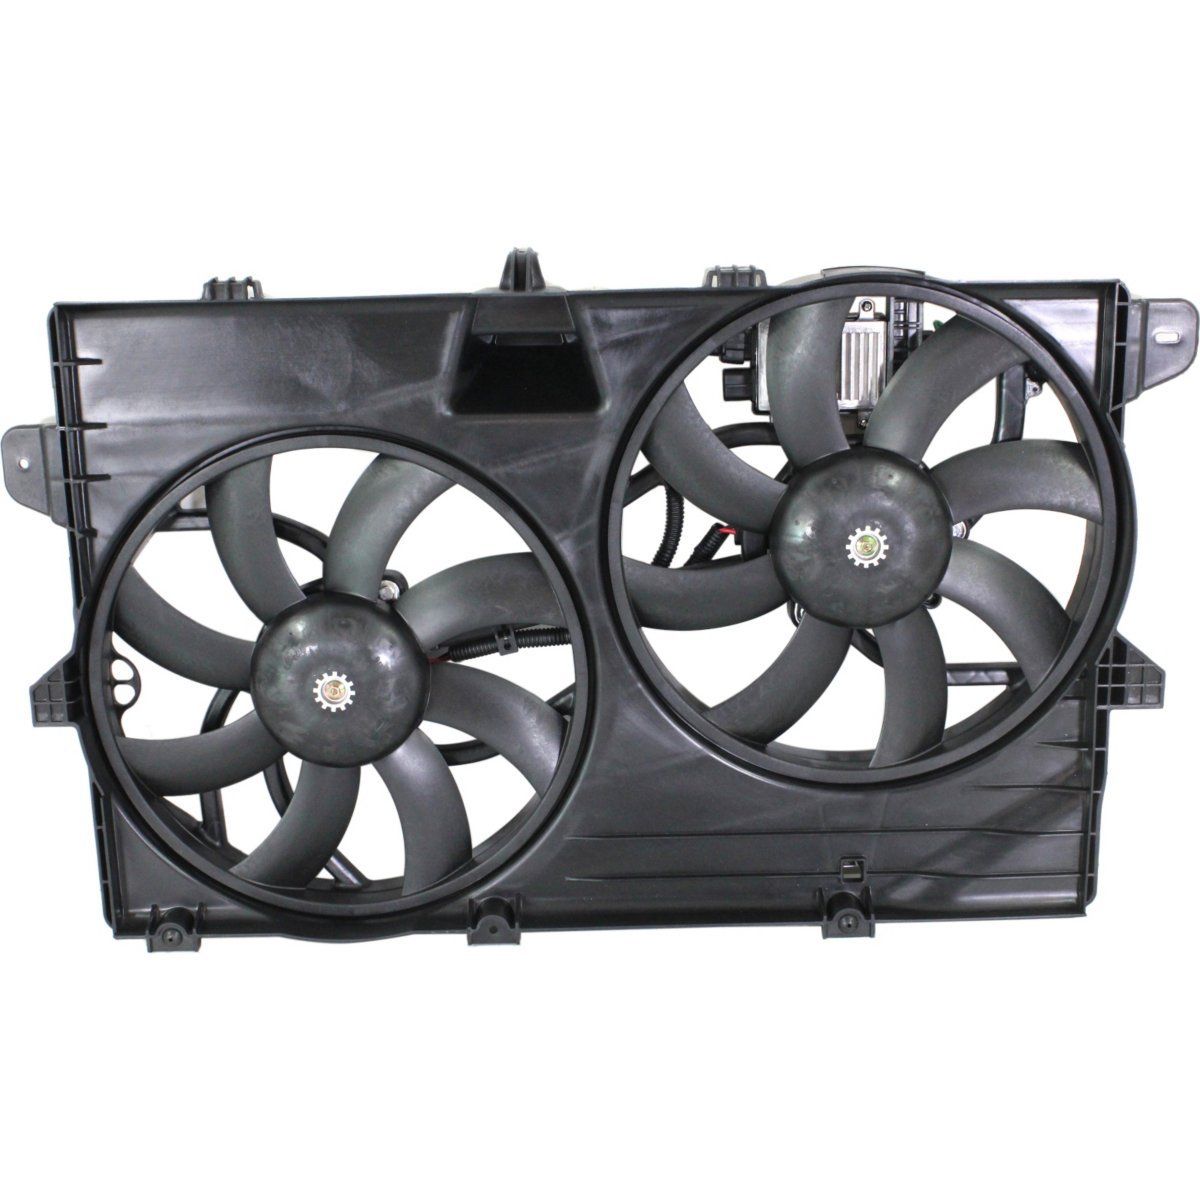 Radiator Cooling Fan For 2007-2013 Ford Edge Lincoln MKX w/ control module | eBay 2007 Ford Edge Radiator Fan Not Working